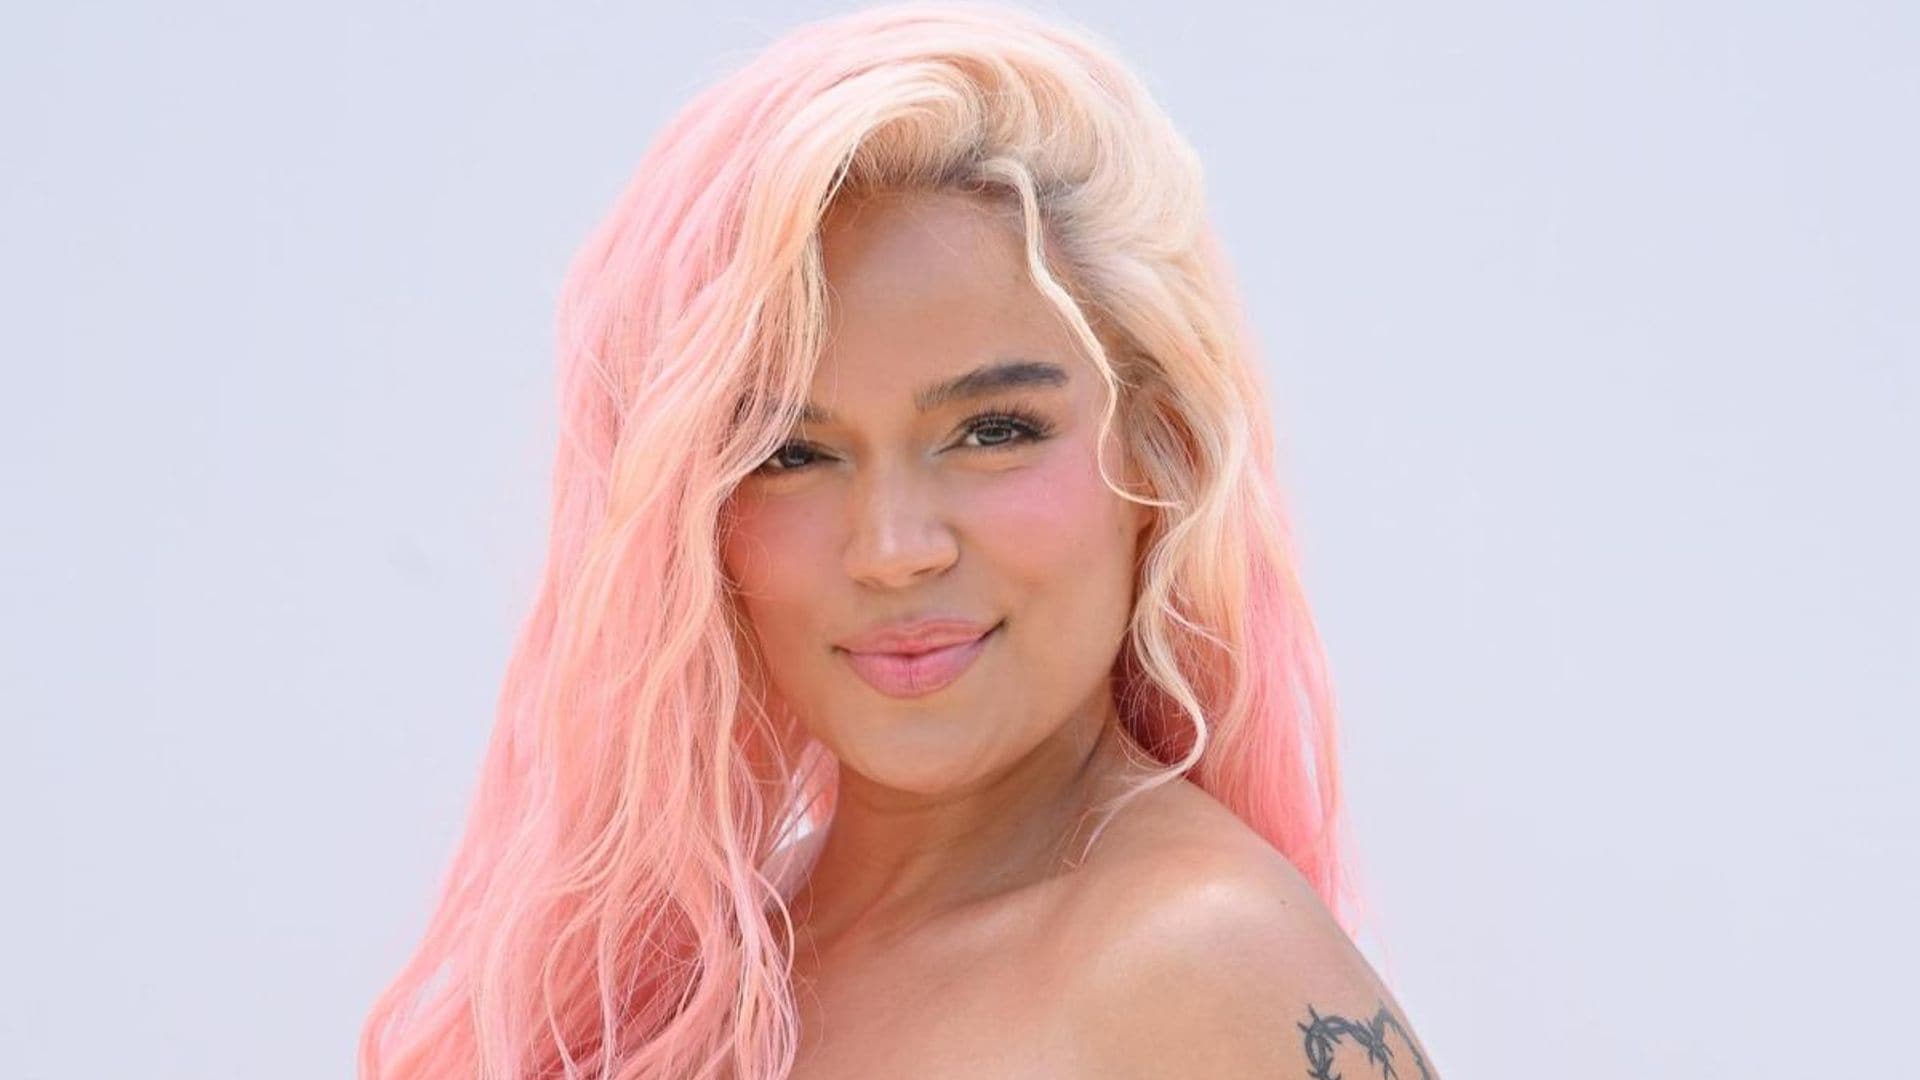 Karol G stuns in an off-the-shoulder gown and ombré pink hair at Jacquemus’ fashion show